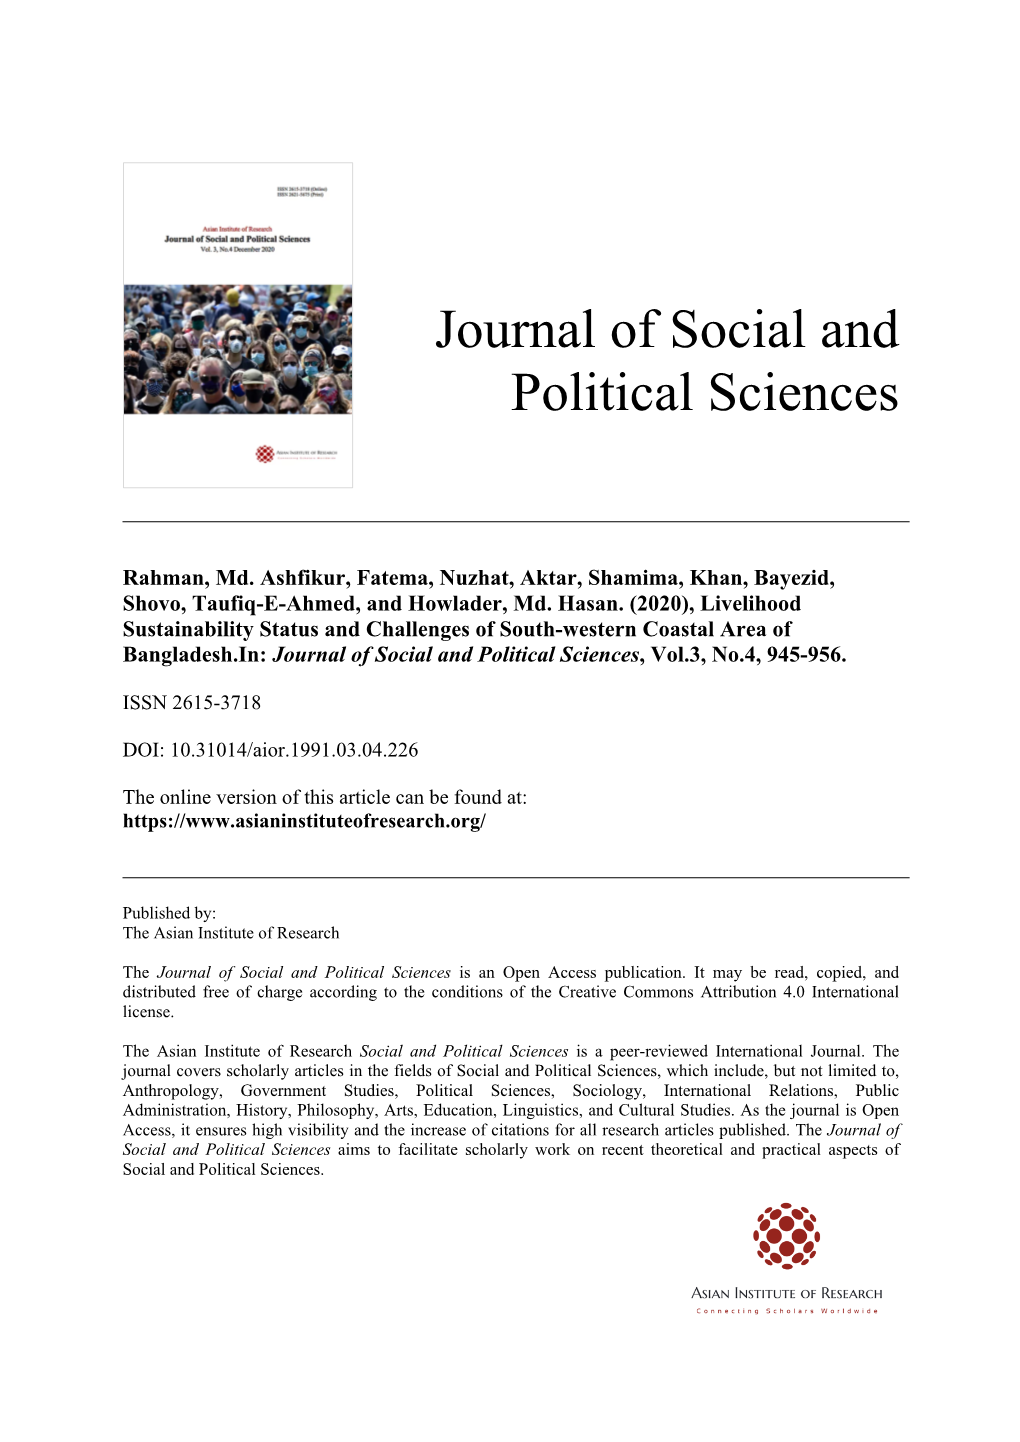 Journal of Social and Political Sciences